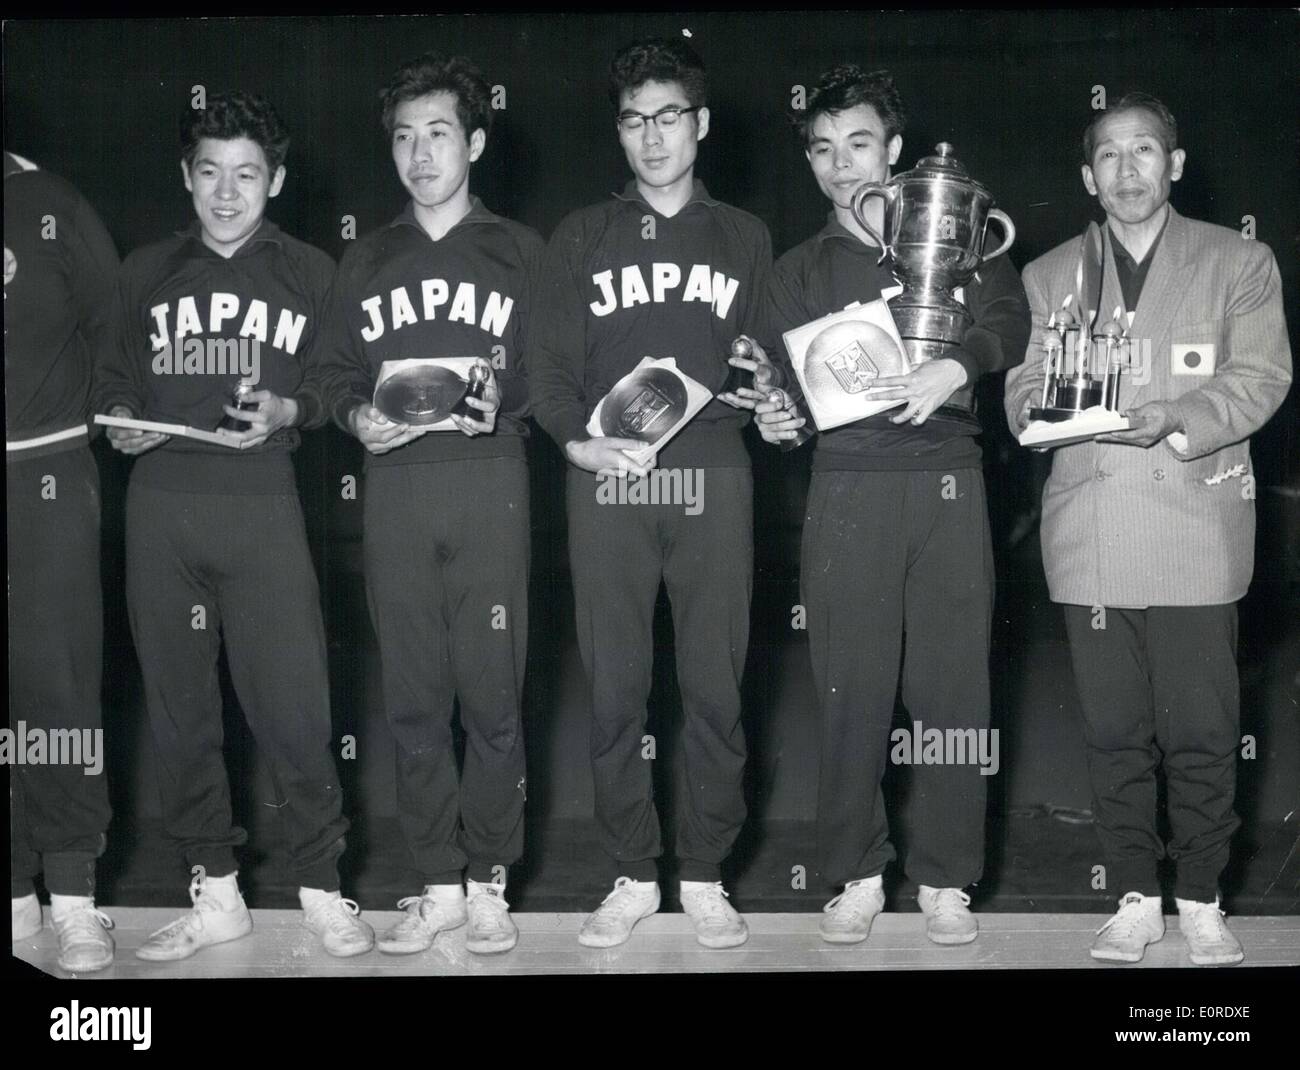 Apr. 04, 1959 - World Championship in Table Tennis 1959 in Dortmund / Germany In the World Championship in Table Tennis 1959 which was held from March 27th till April 5th, 1959 in Dortmund/Germany on March 31st the title of the Team-World champion was given to the Japanese teams, both women and men team. The women were able to beat the Korean team after hard combat, and the men beat the Hungarian team (2nd) 5:1. O.p.s:- The male team of the Japanese World-Champion (left to right) Seiji Narita, Nobuya Hoshino, Teruo Murakami, Ischiro Ogimura who has twice been world-champion, and their trainer Stock Photo